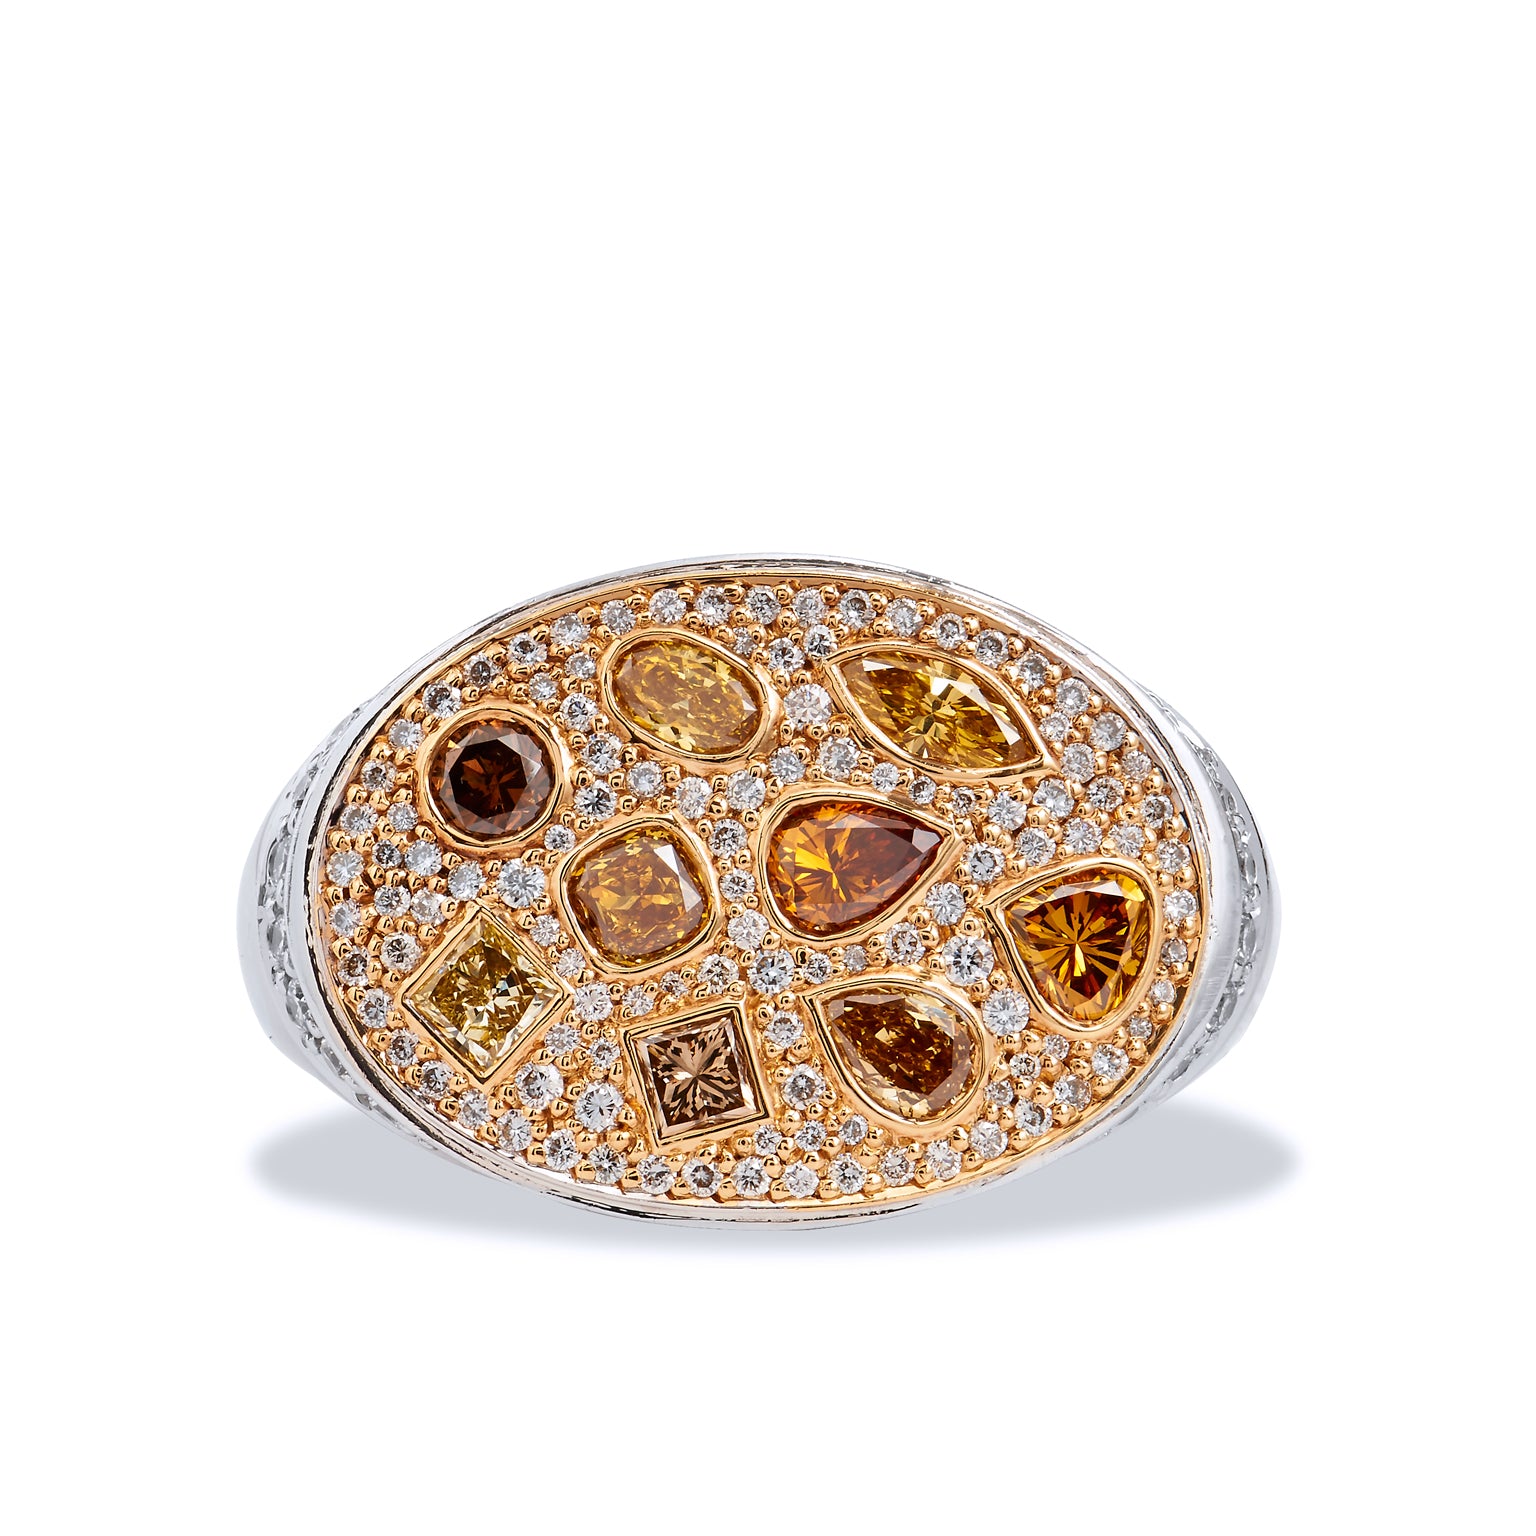 Hans D. Krieger Color Diamond Ring Rings Curated by H